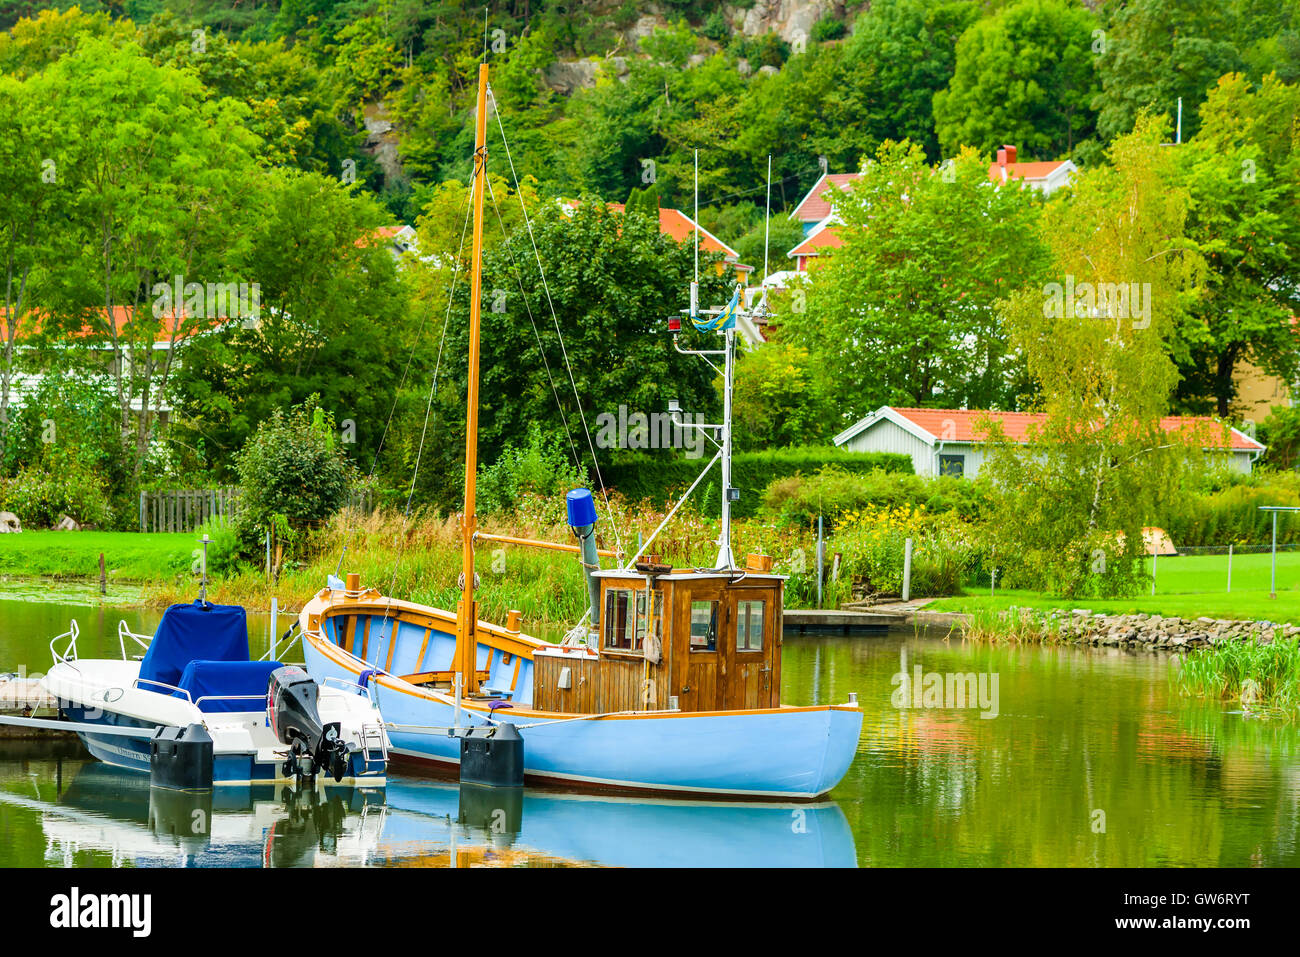 Kungalv, Sweden - September 8, 2016: Traveling in Sweden, blue fishing boat moored riverside with trees and homes in the backgro Stock Photo